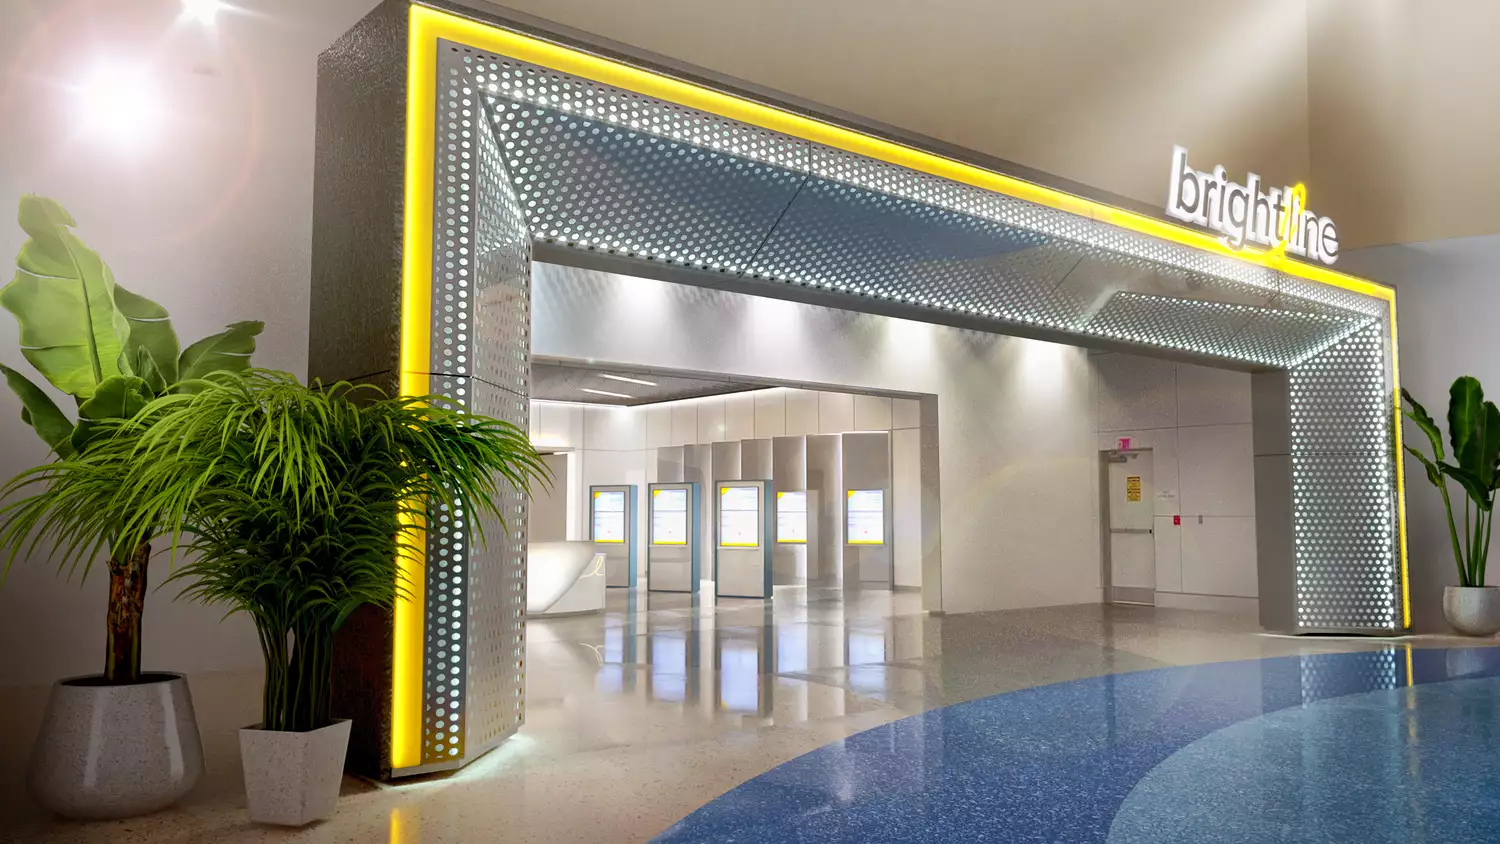 See Inside the New Orlando Station that Brightline Just Unveiled!